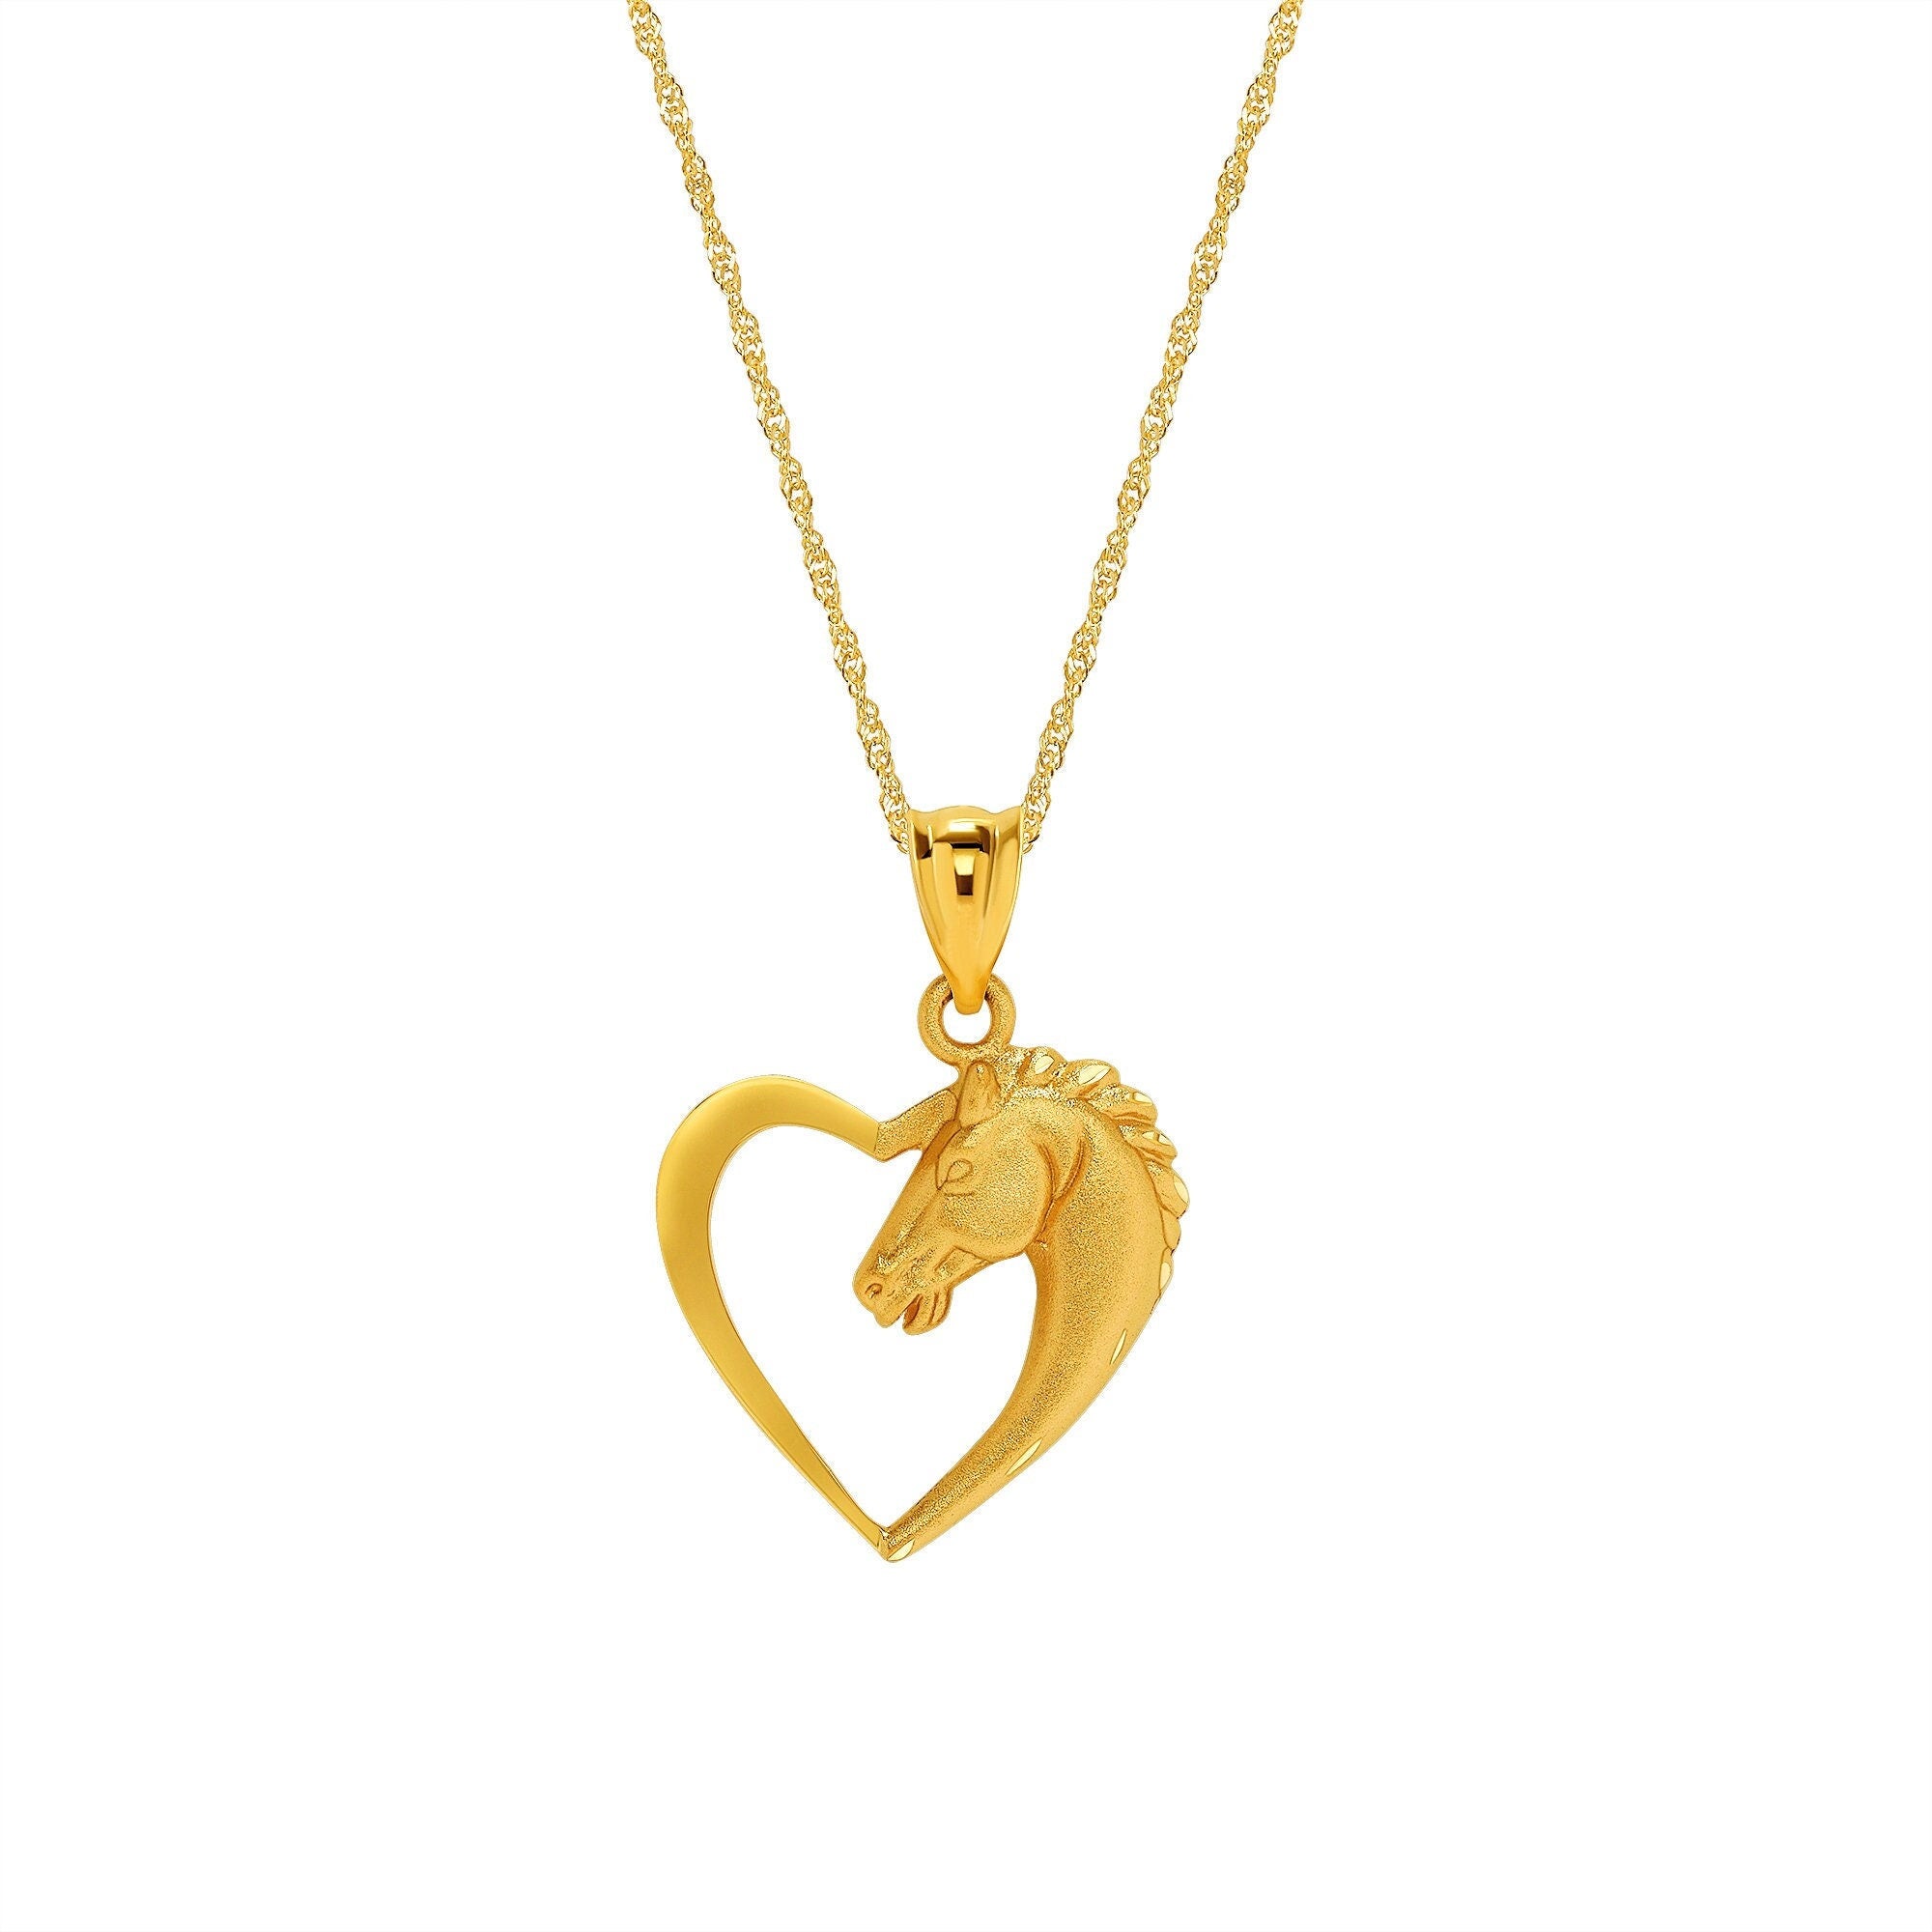 14k solid gold heart shape horse pendant on 18" chain